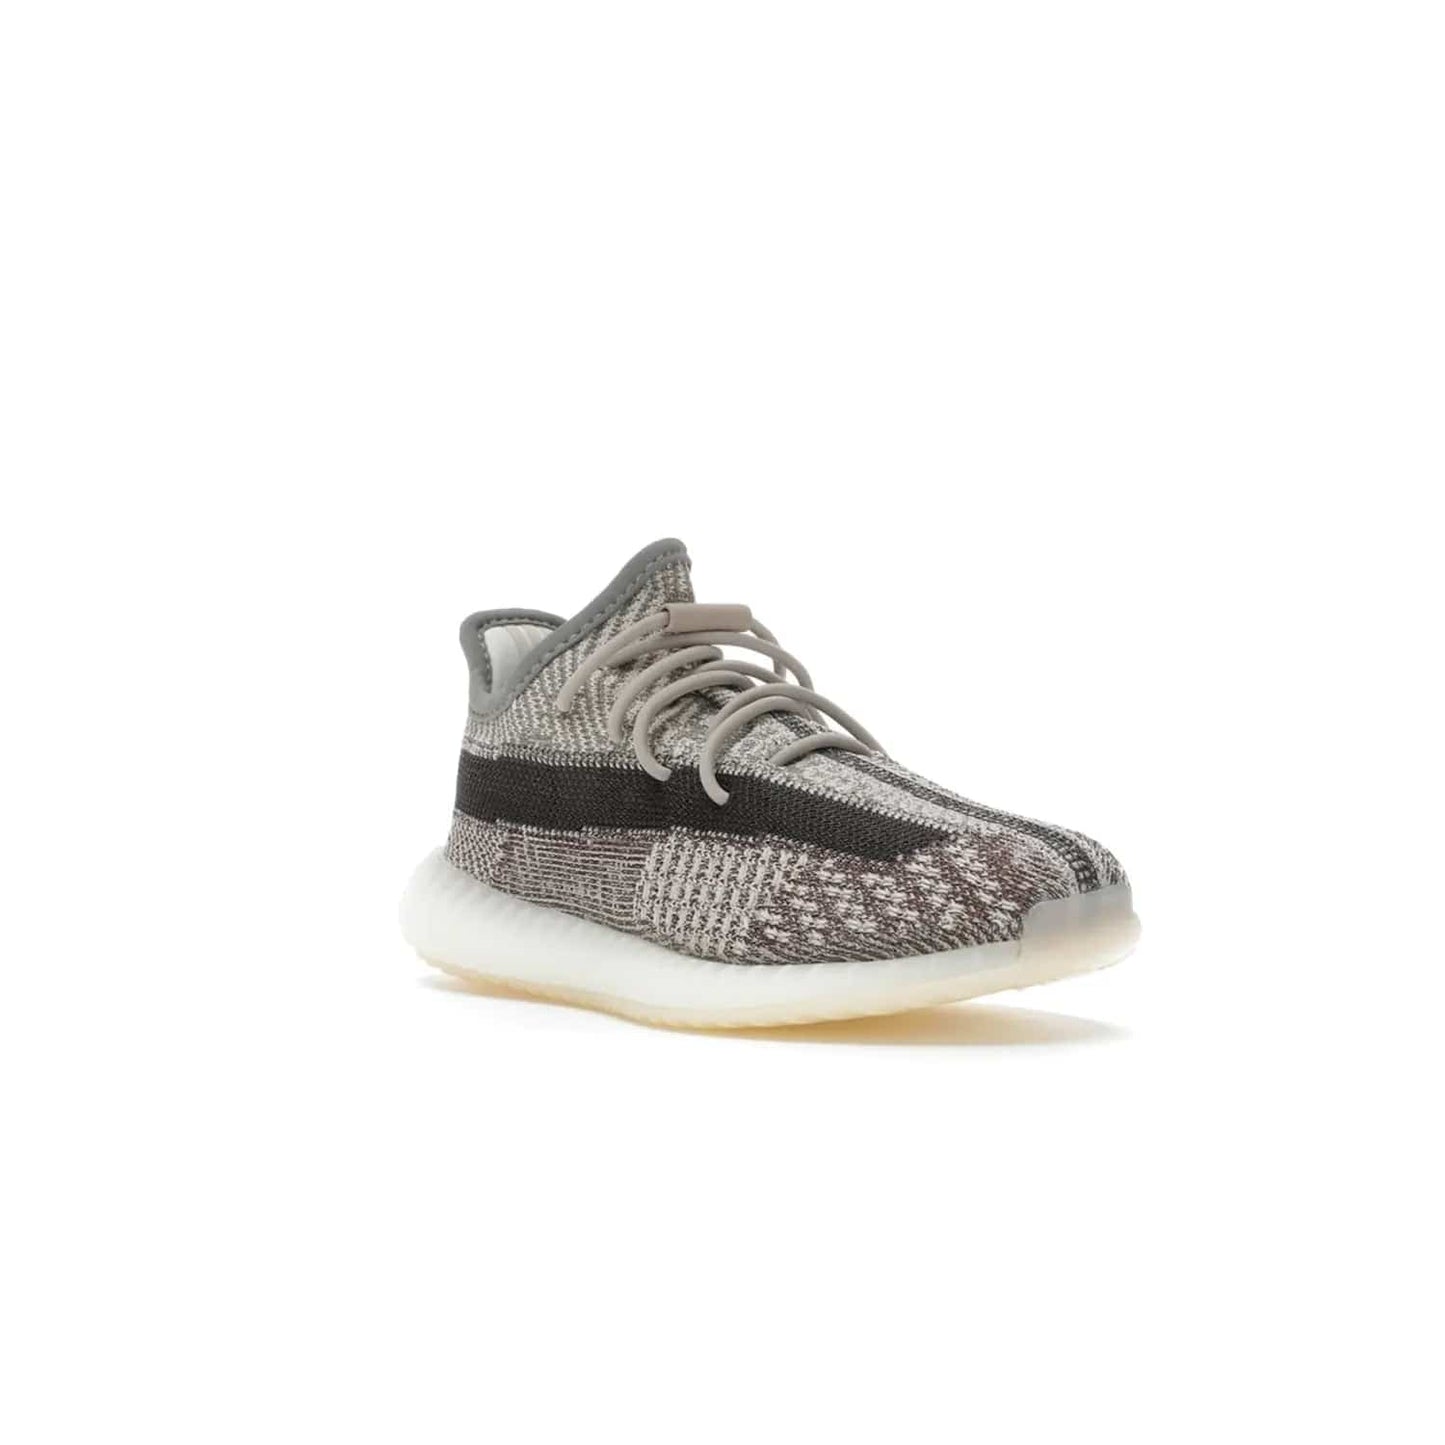 adidas Yeezy Boost 350 V2 Zyon (Kids) - Image 6 - Only at www.BallersClubKickz.com - The adidas Yeezy Boost 350 V2 Zyon (Kids) - perfect pick for fashion-savvy kids. Features soft Primeknit upper, lace closure & colorful patterning. Comfort & style for kids' summer outfits!